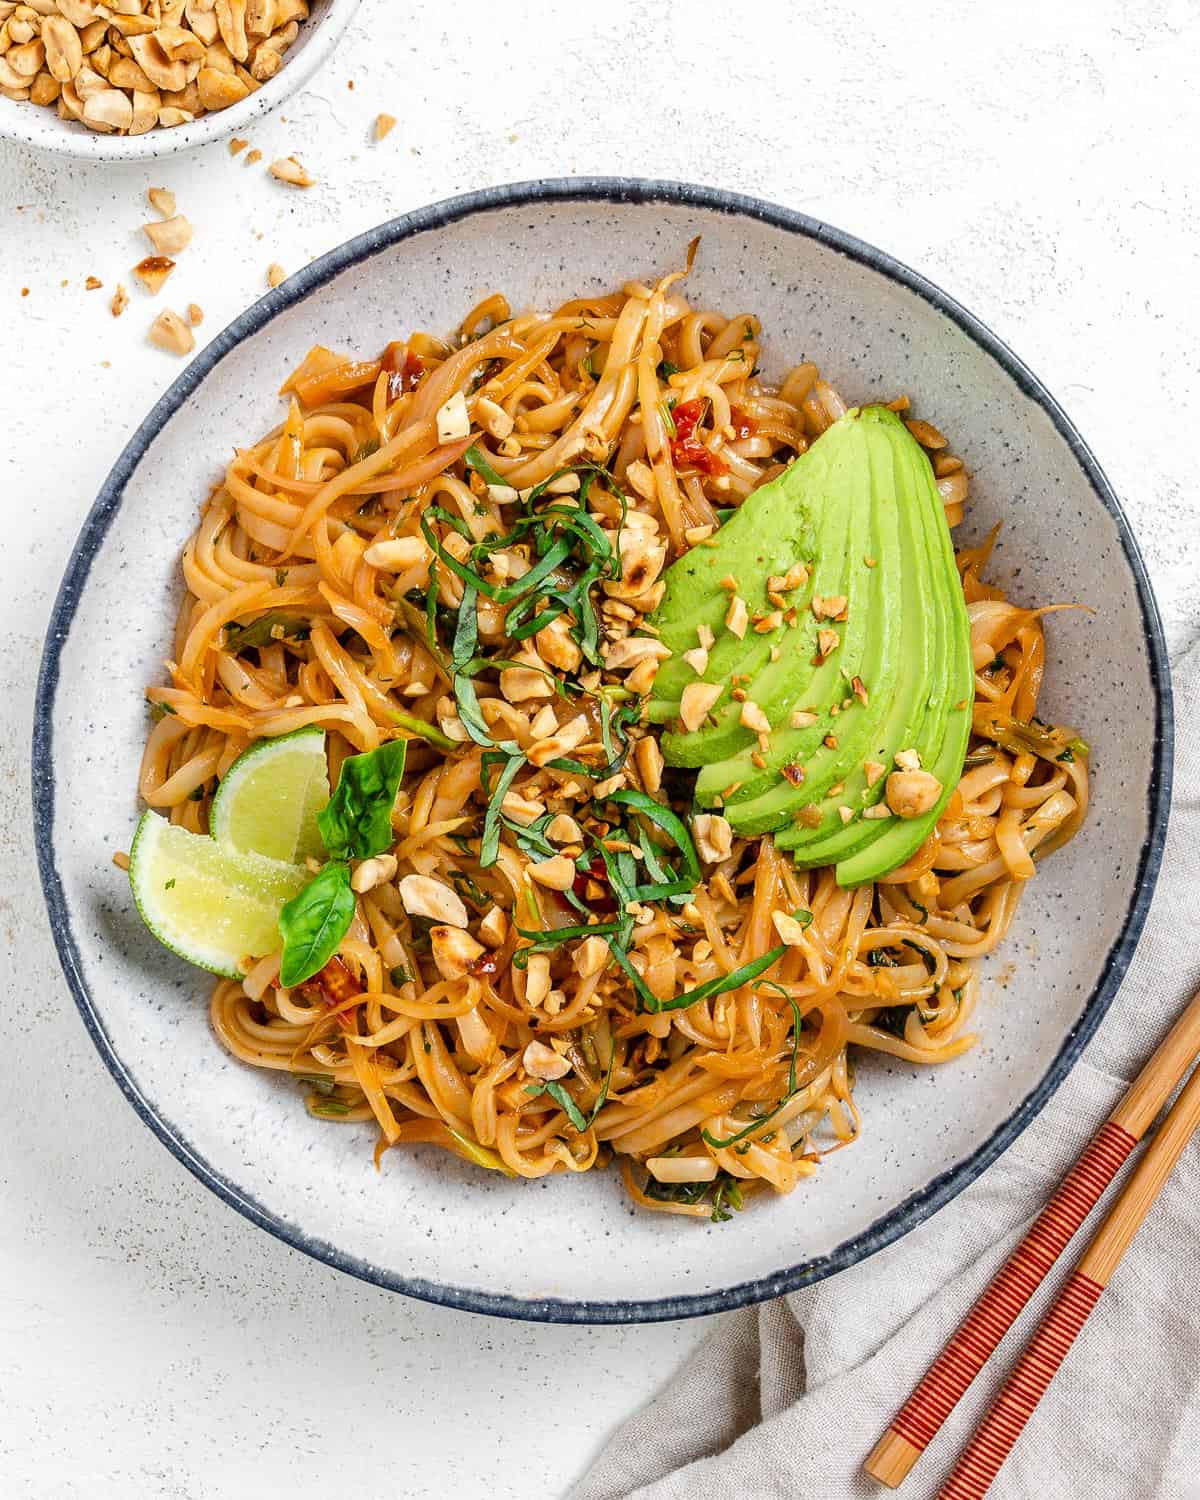 completed Vegan Vegetable Pad Thai plated against a light background